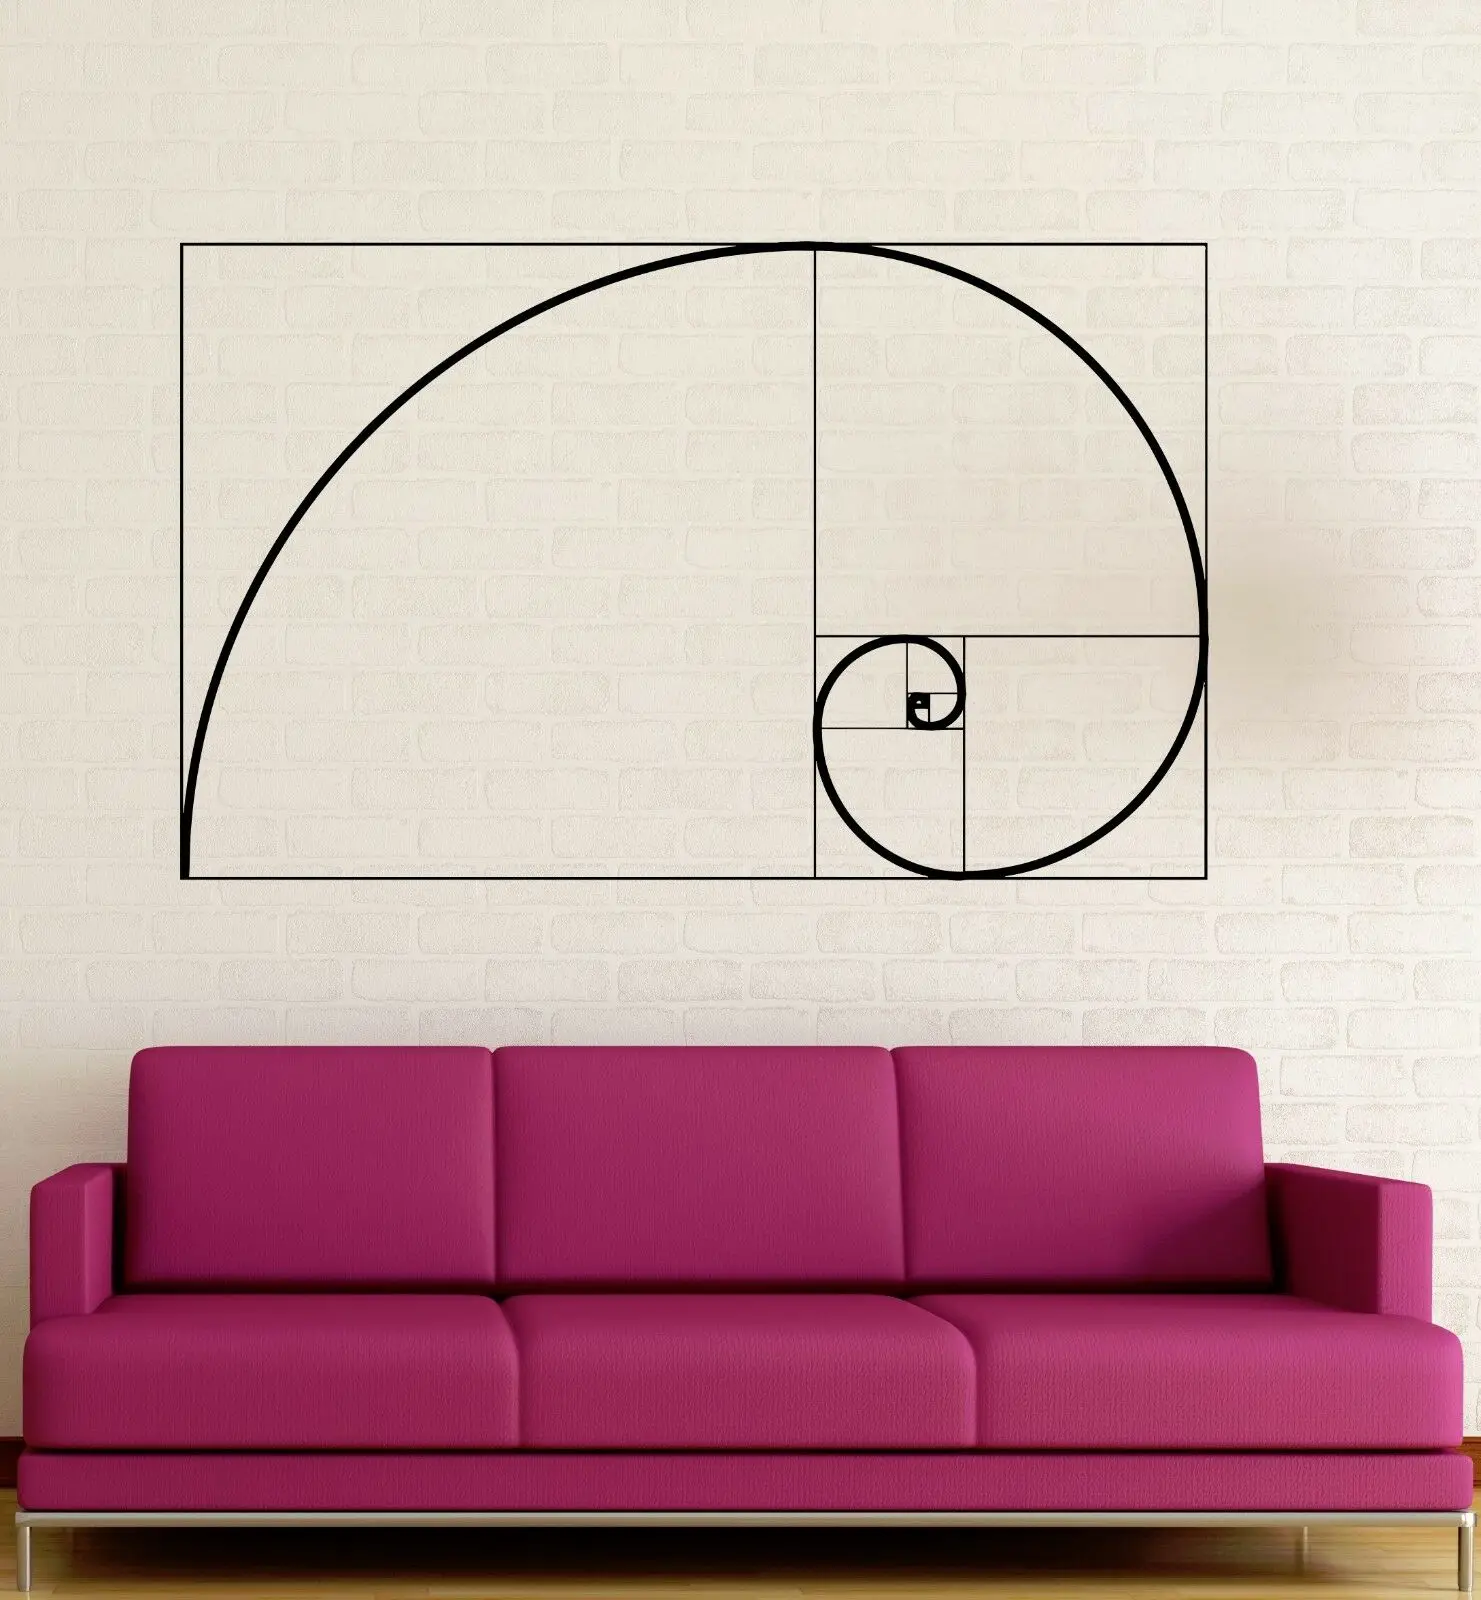 

Vinyl Lettering Wall Decal Golden Ratio Geometry Math Mural Stickers Home Decor Living Room Bedroom Creative School Decals A448